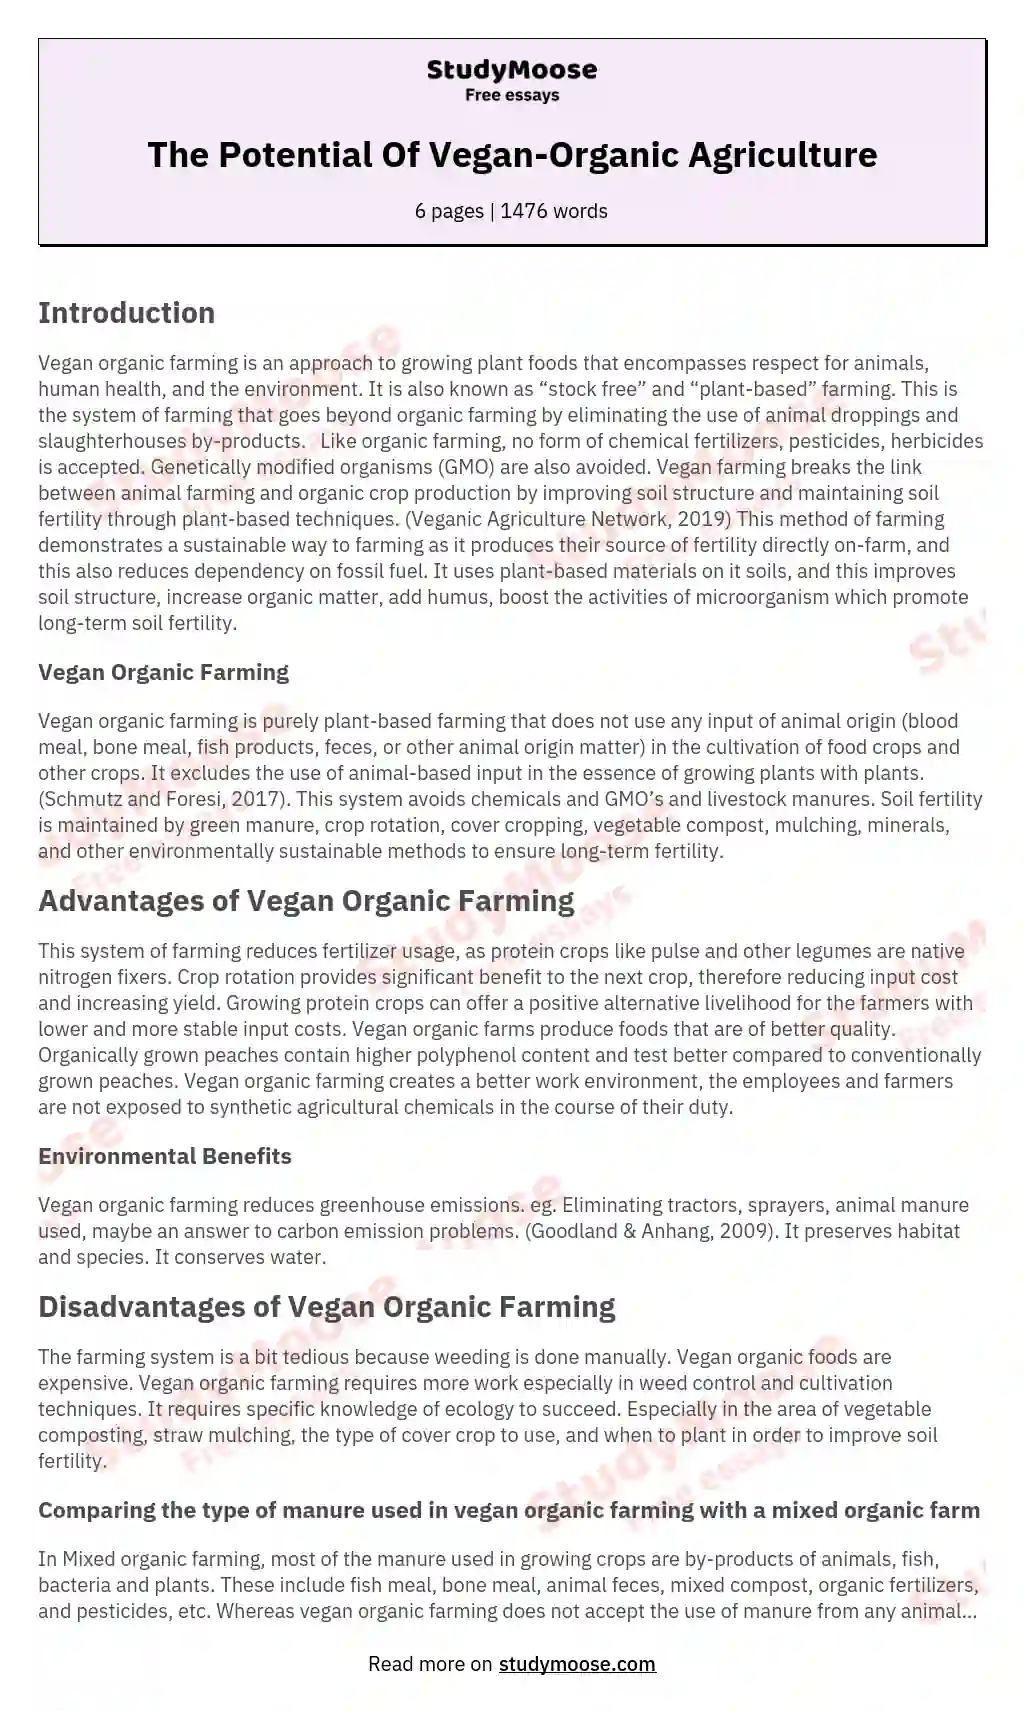 The Potential Of Vegan-Organic Agriculture